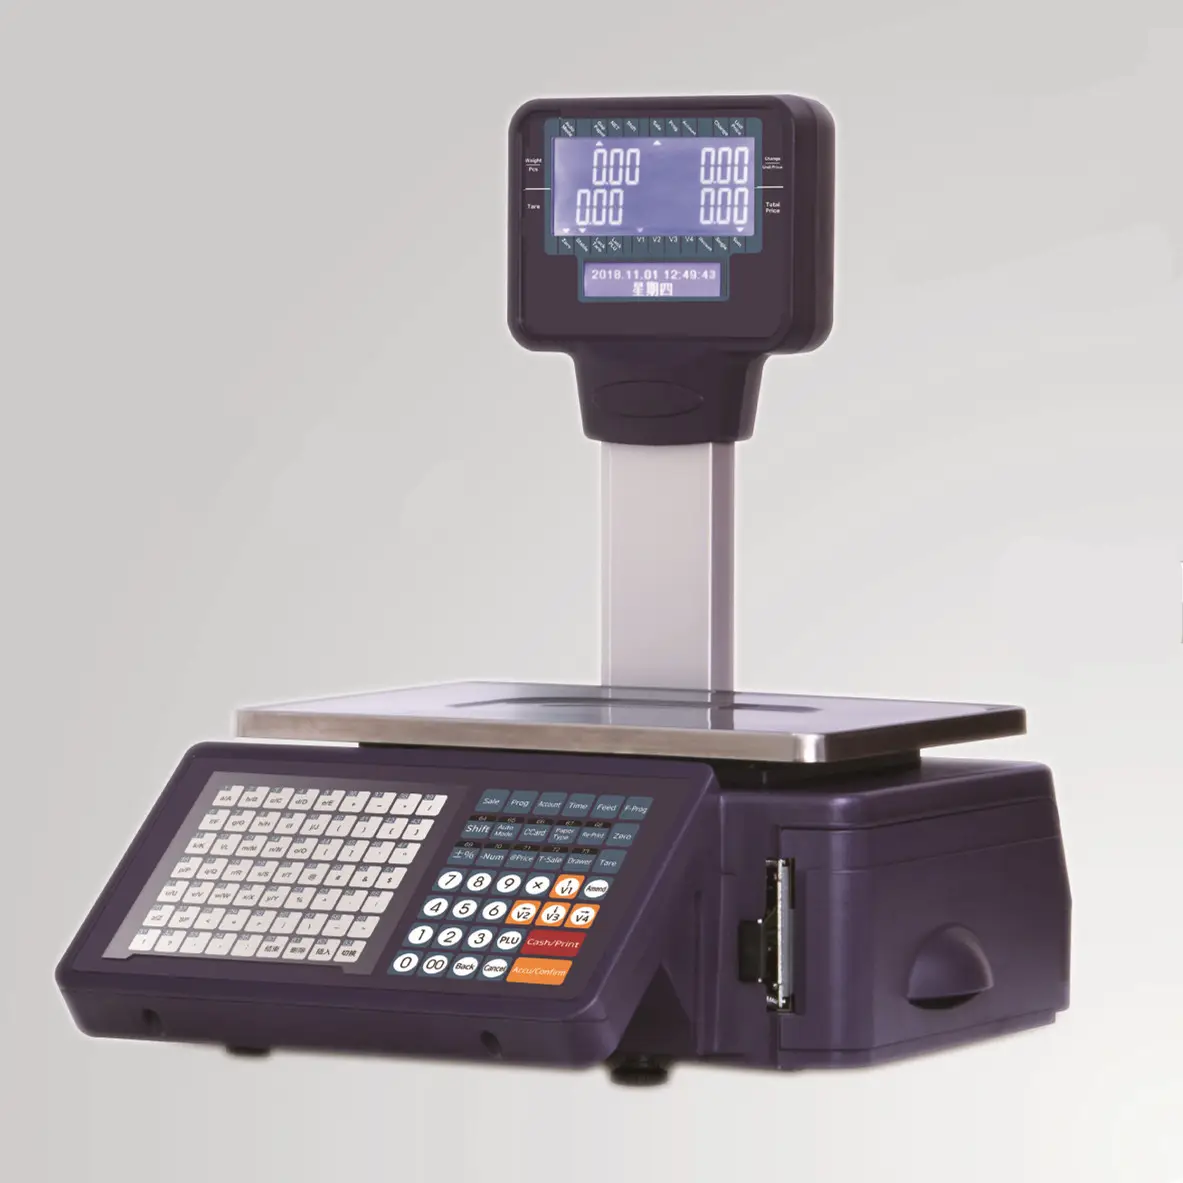 2019 15/30kg POS Systems Digital Cash Register Scales Barcode Label Printing Scale Big screen Electronic Balance